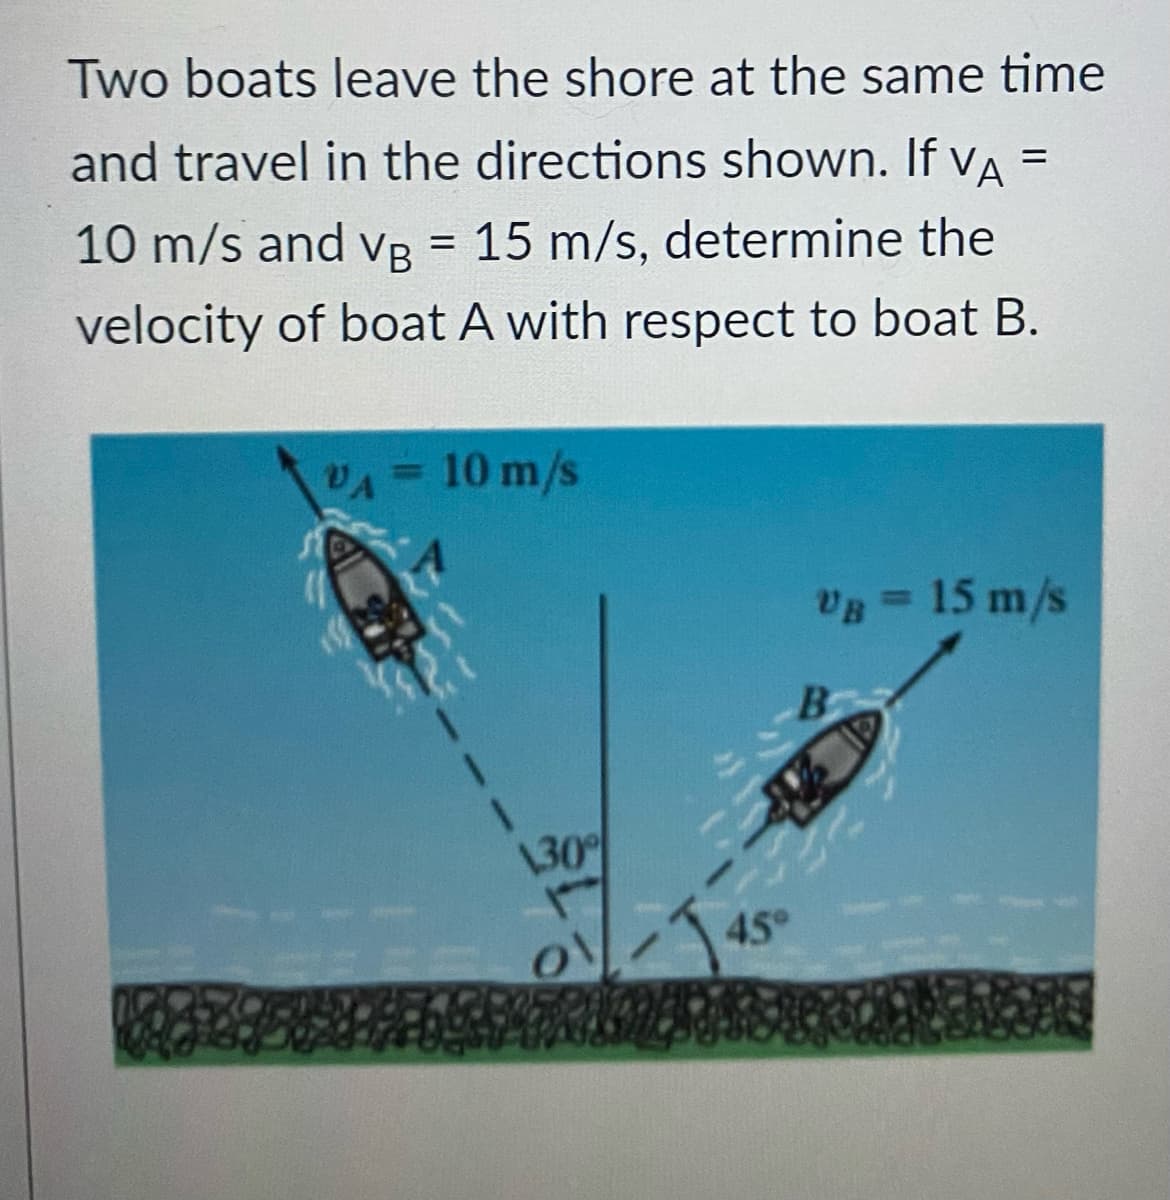 Two boats leave the shore at the same time
and travel in the directions shown. If vA =
10 m/s and vB = 15 m/s, determine the
velocity of boat A with respect to boat B.
VA= 10 m/s
%3D
%3D
VB
vg
= 15 m/s
B.
130
45°
